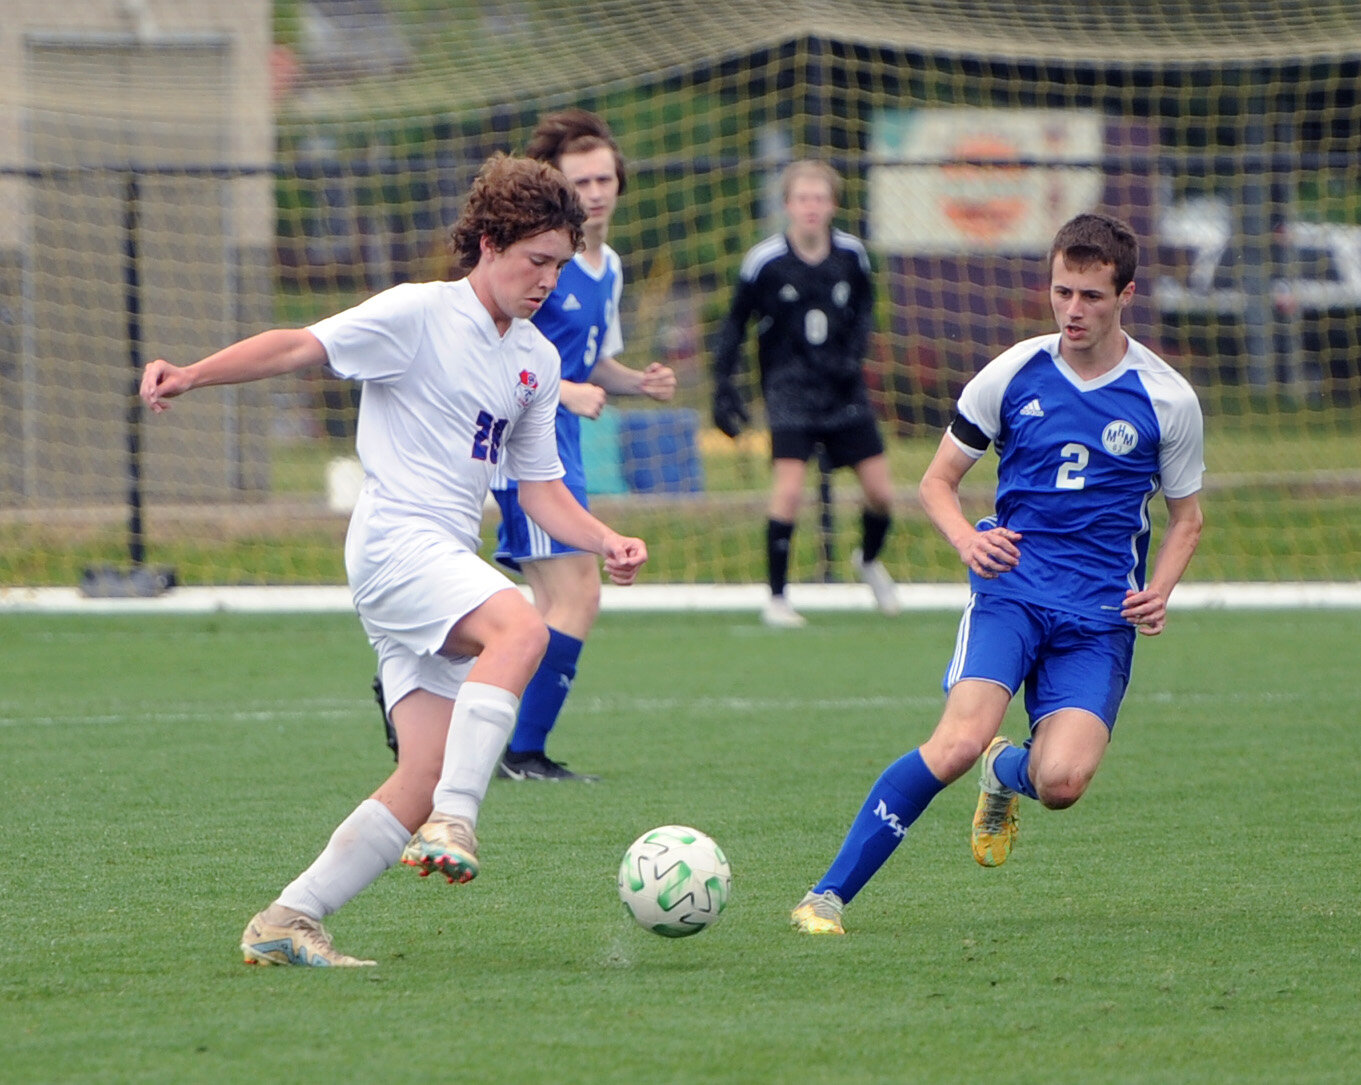 Isaac Cruse settles the ball for a Forrest attack on Merrol Hyde.